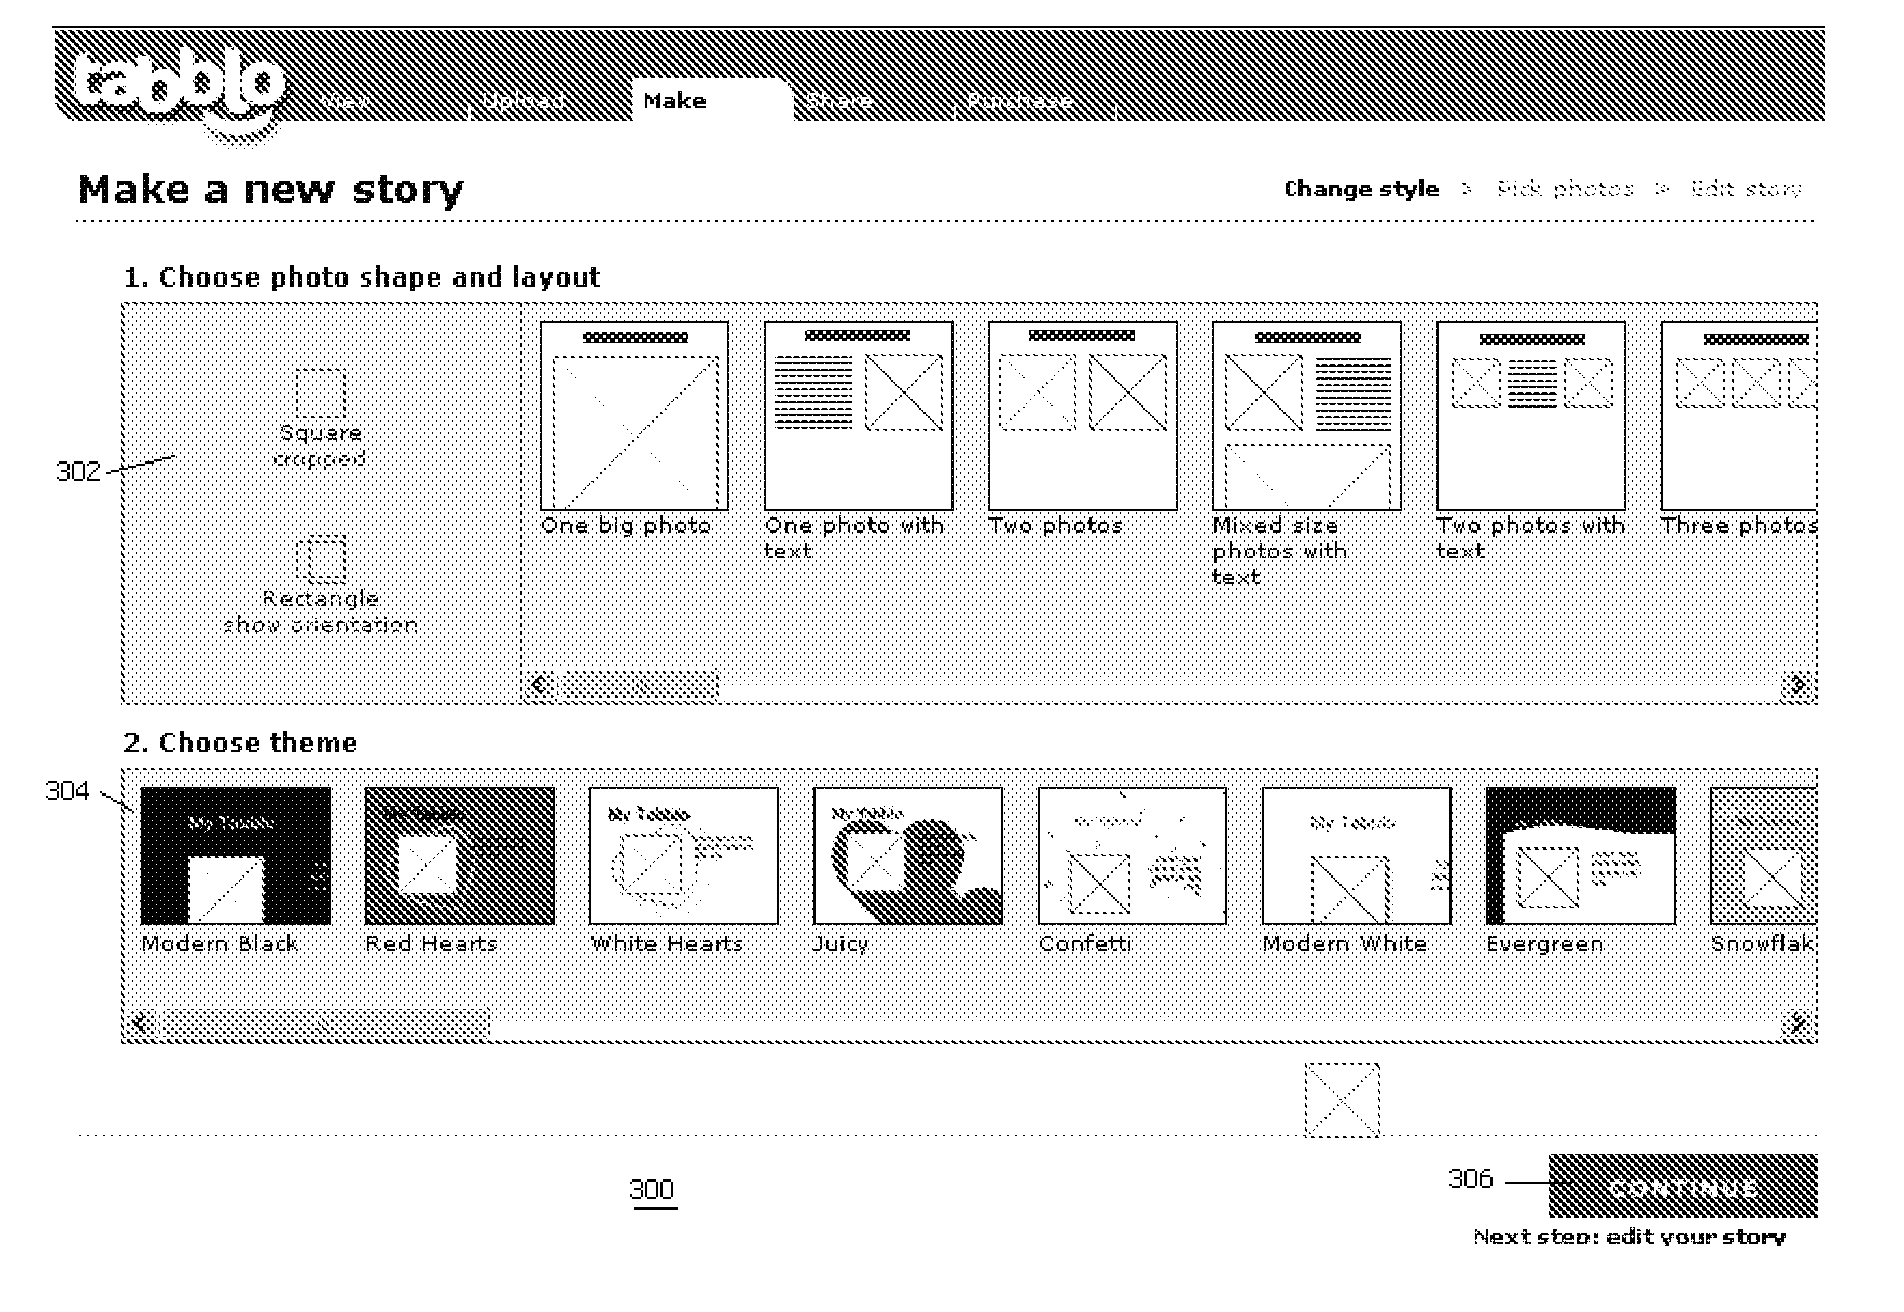 Method for initial layout of story elements in a user-generated online story